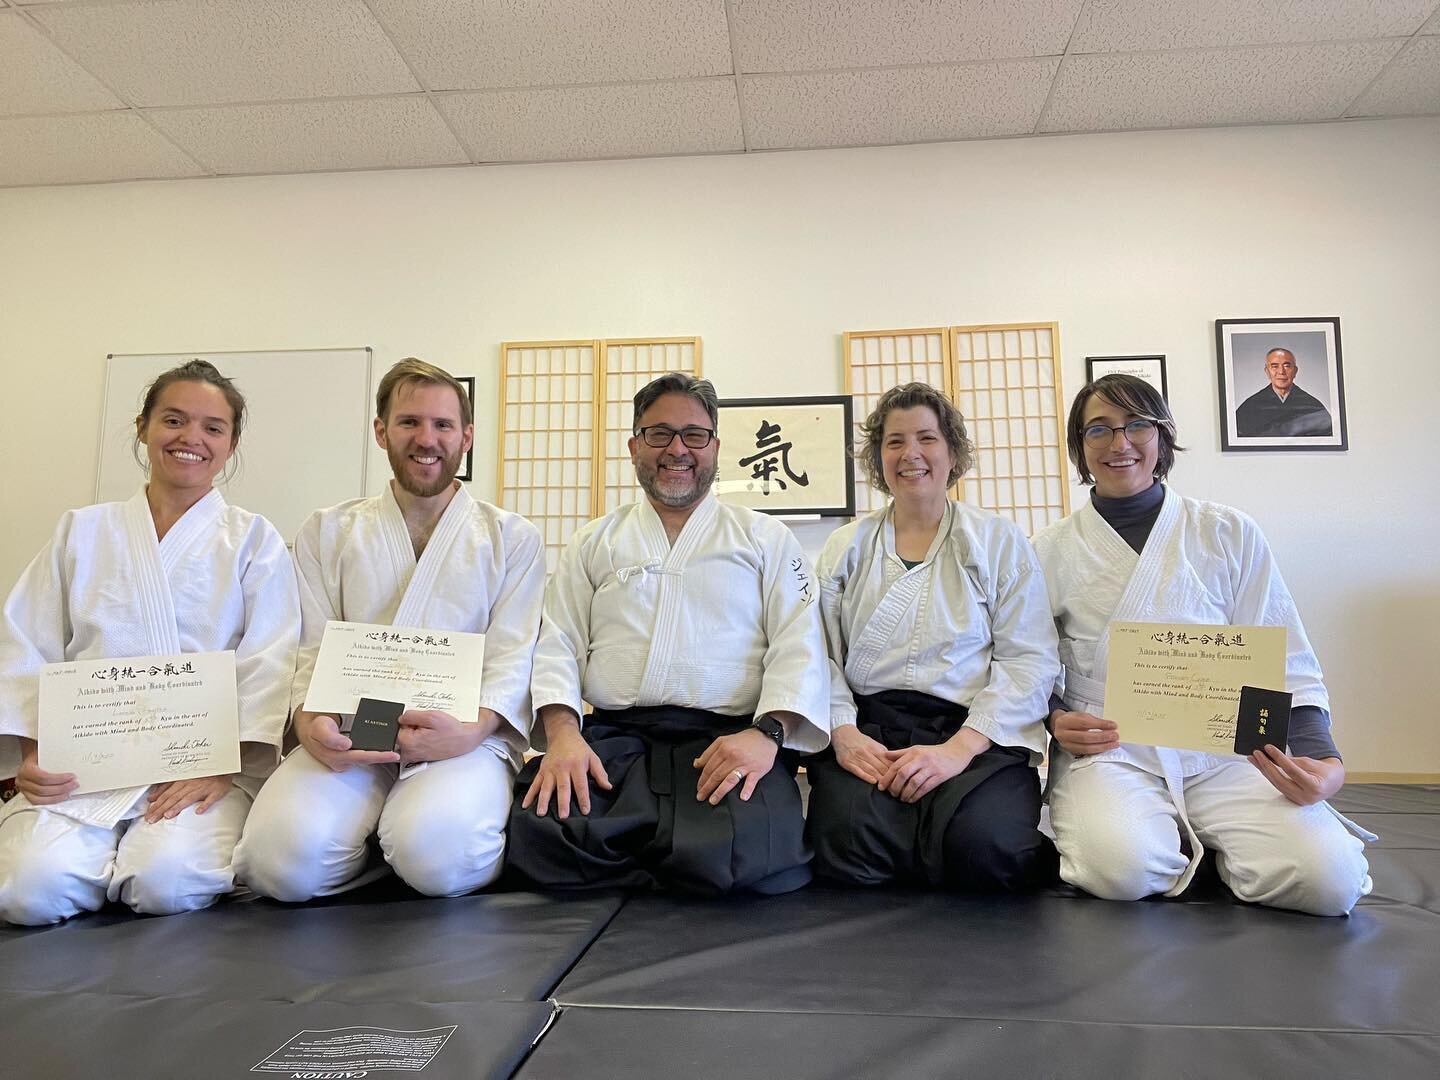 Congrats to everyone on their terrific Ki-Aikido test performances today! great #kitraining and #mindbodymovemet. Tons of bonus options which everyone aced. An indication of #dedication and #mindbody #flexibility in #martialartstraining. Join us at #